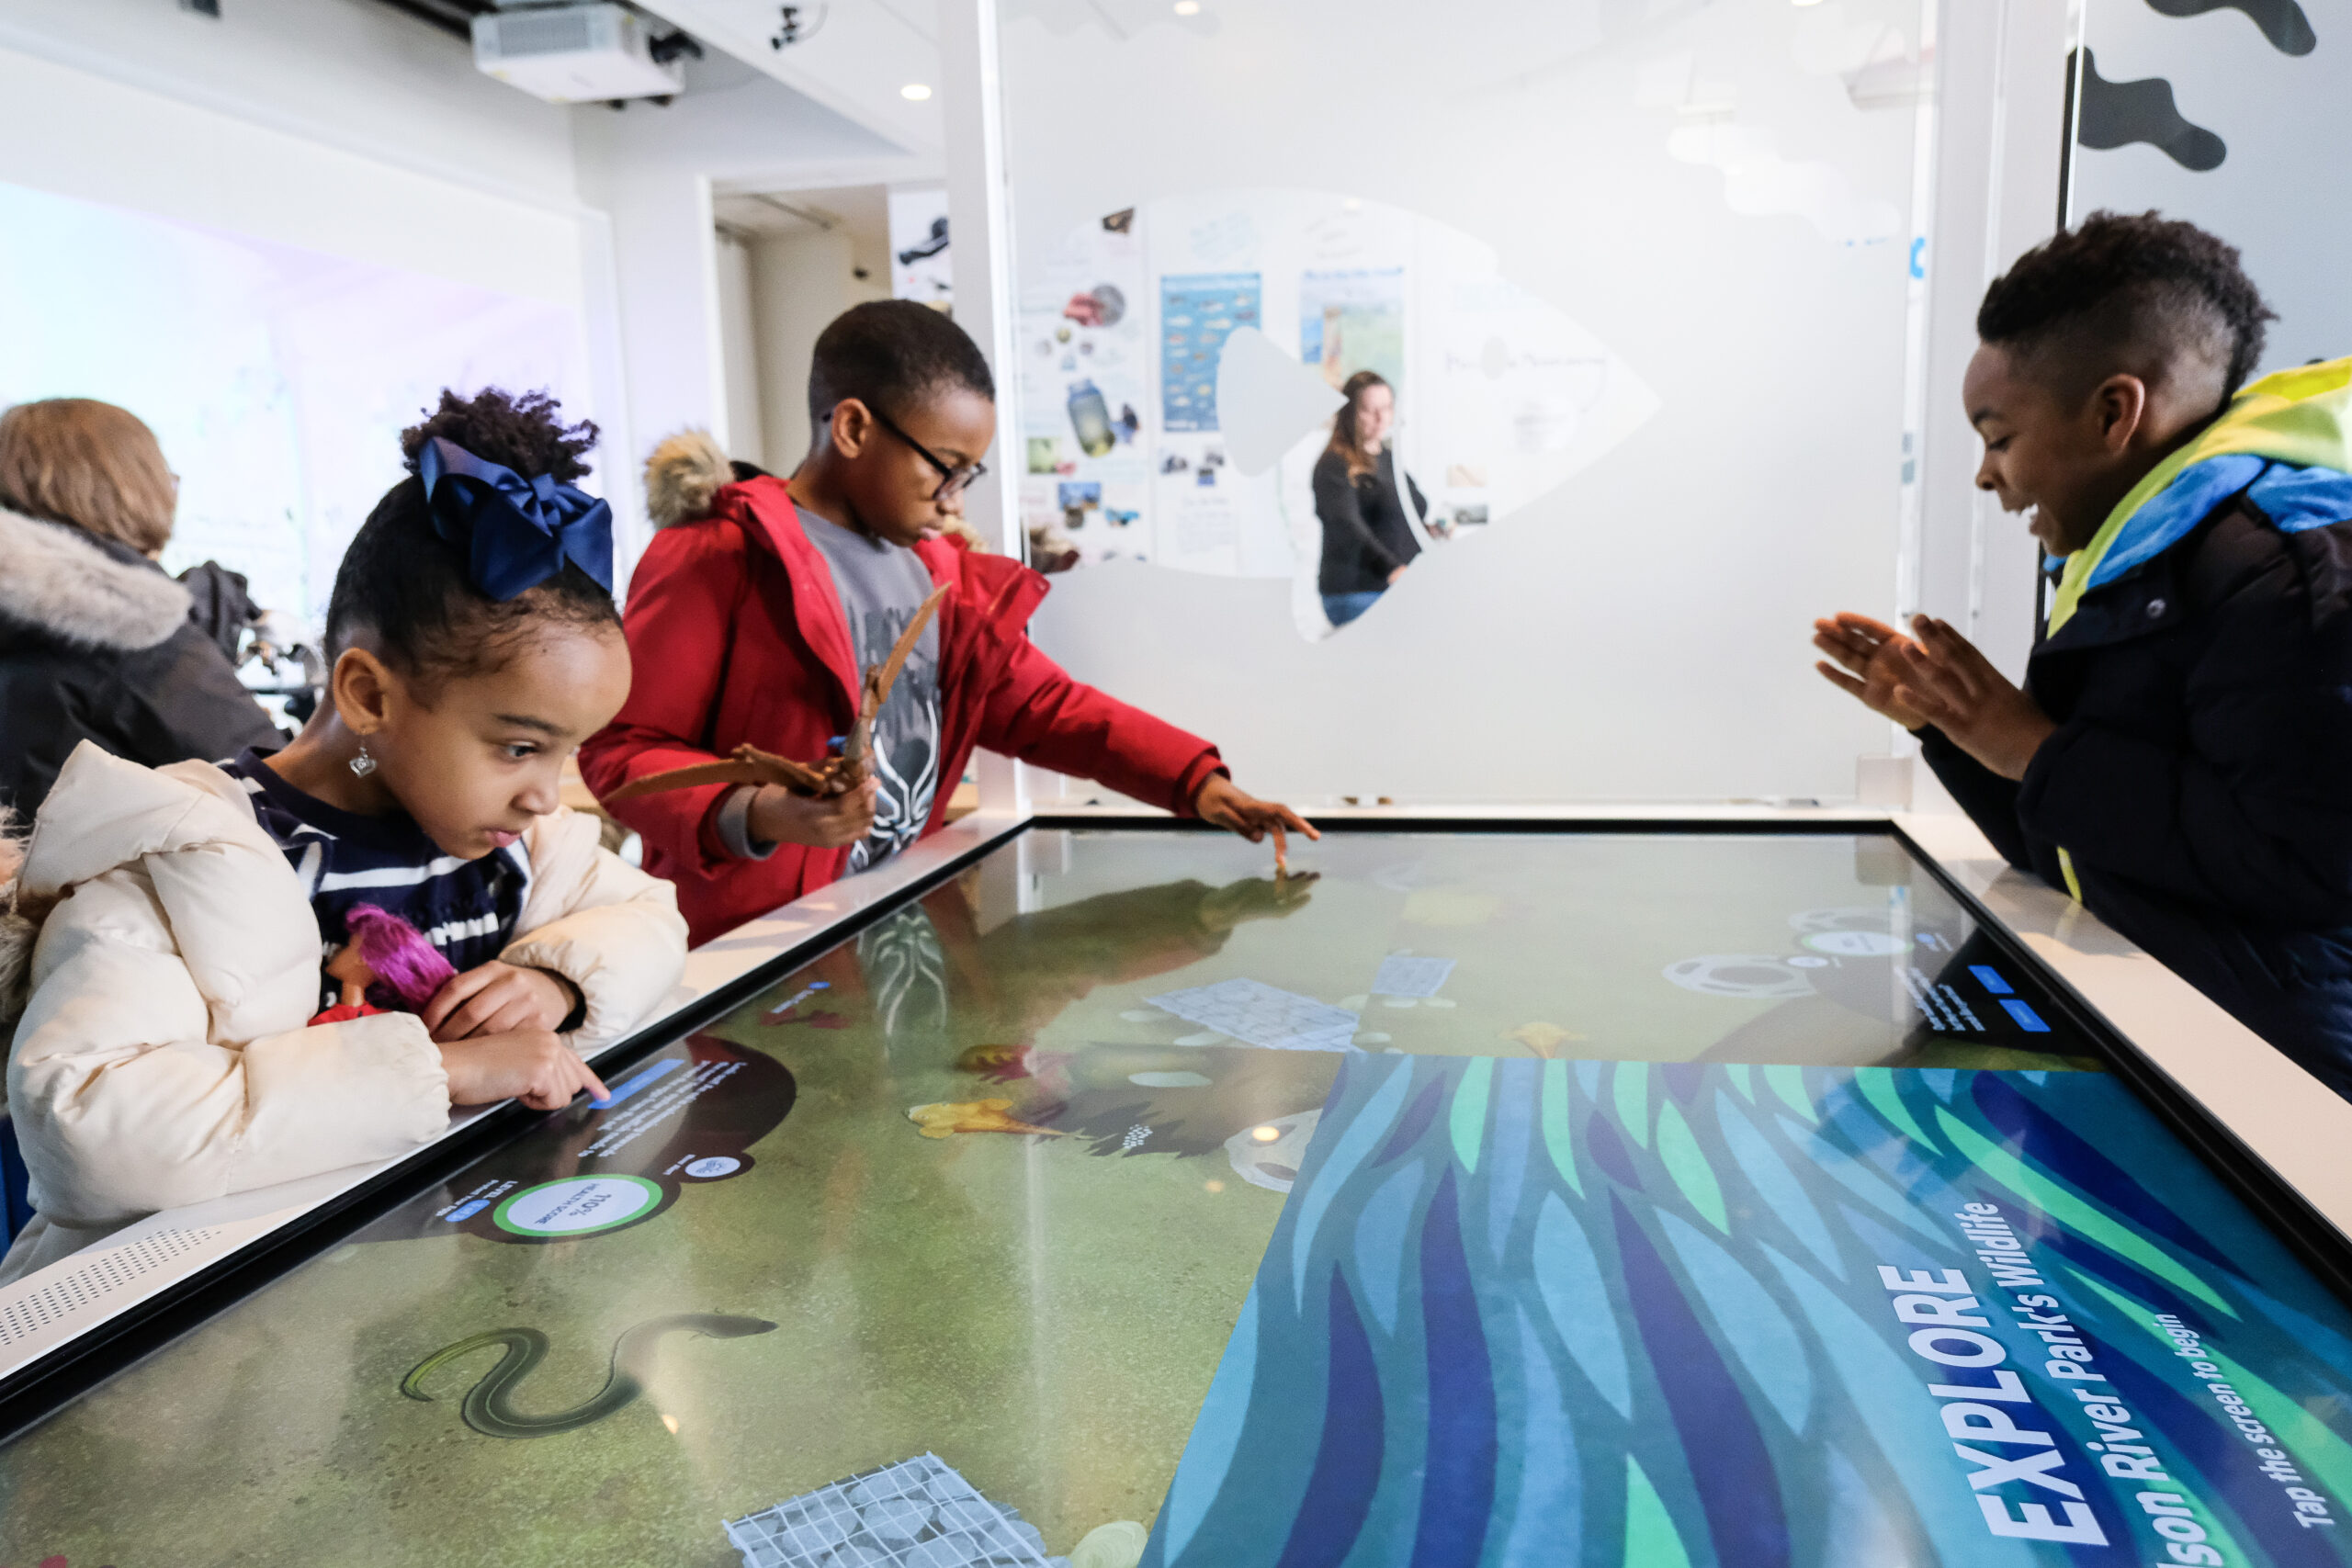 Students interact with a tabletop touchscreen display at the Pier 57 Discovery Tank